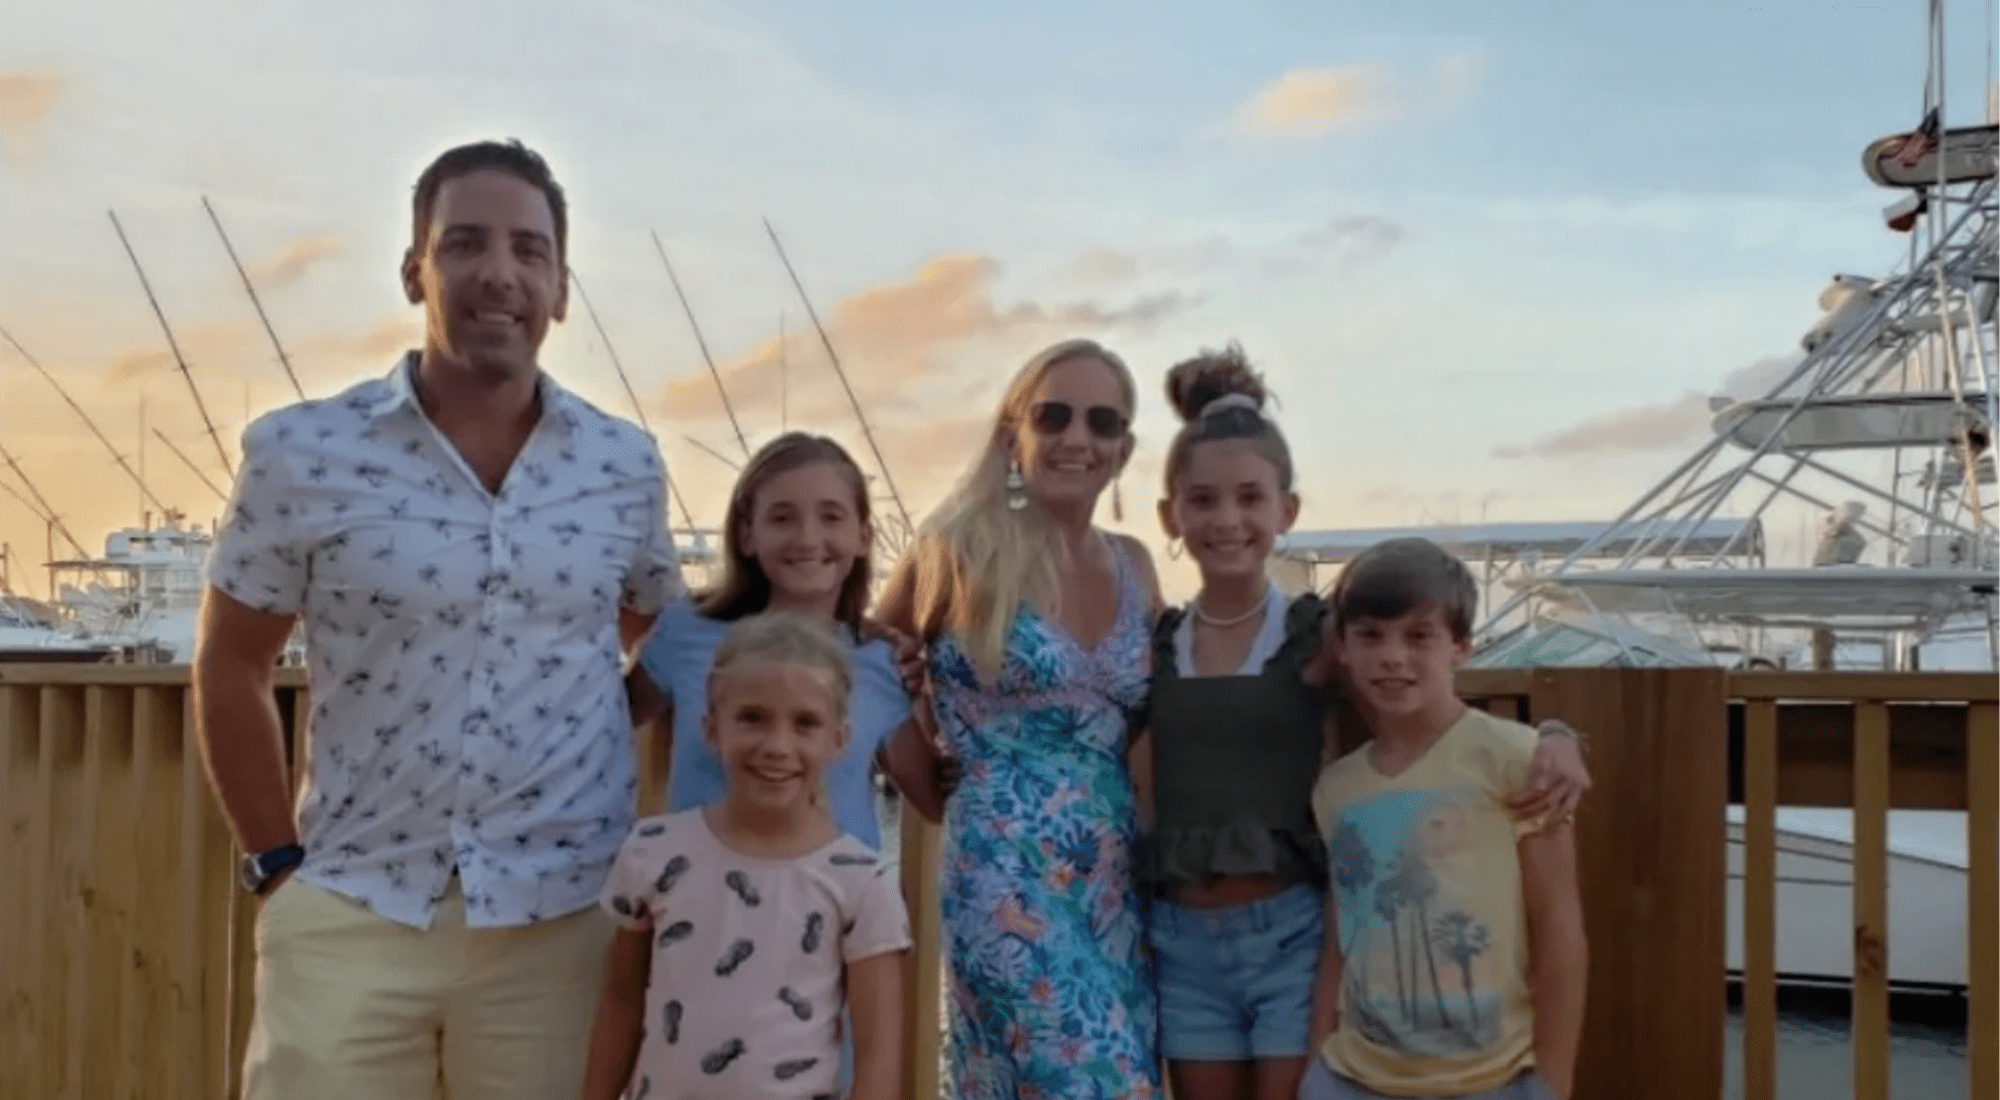 We Love Palmilla Beach Resort - Meet The Cronins Article featured image showing the family of six at a harbor with a yacht in the background